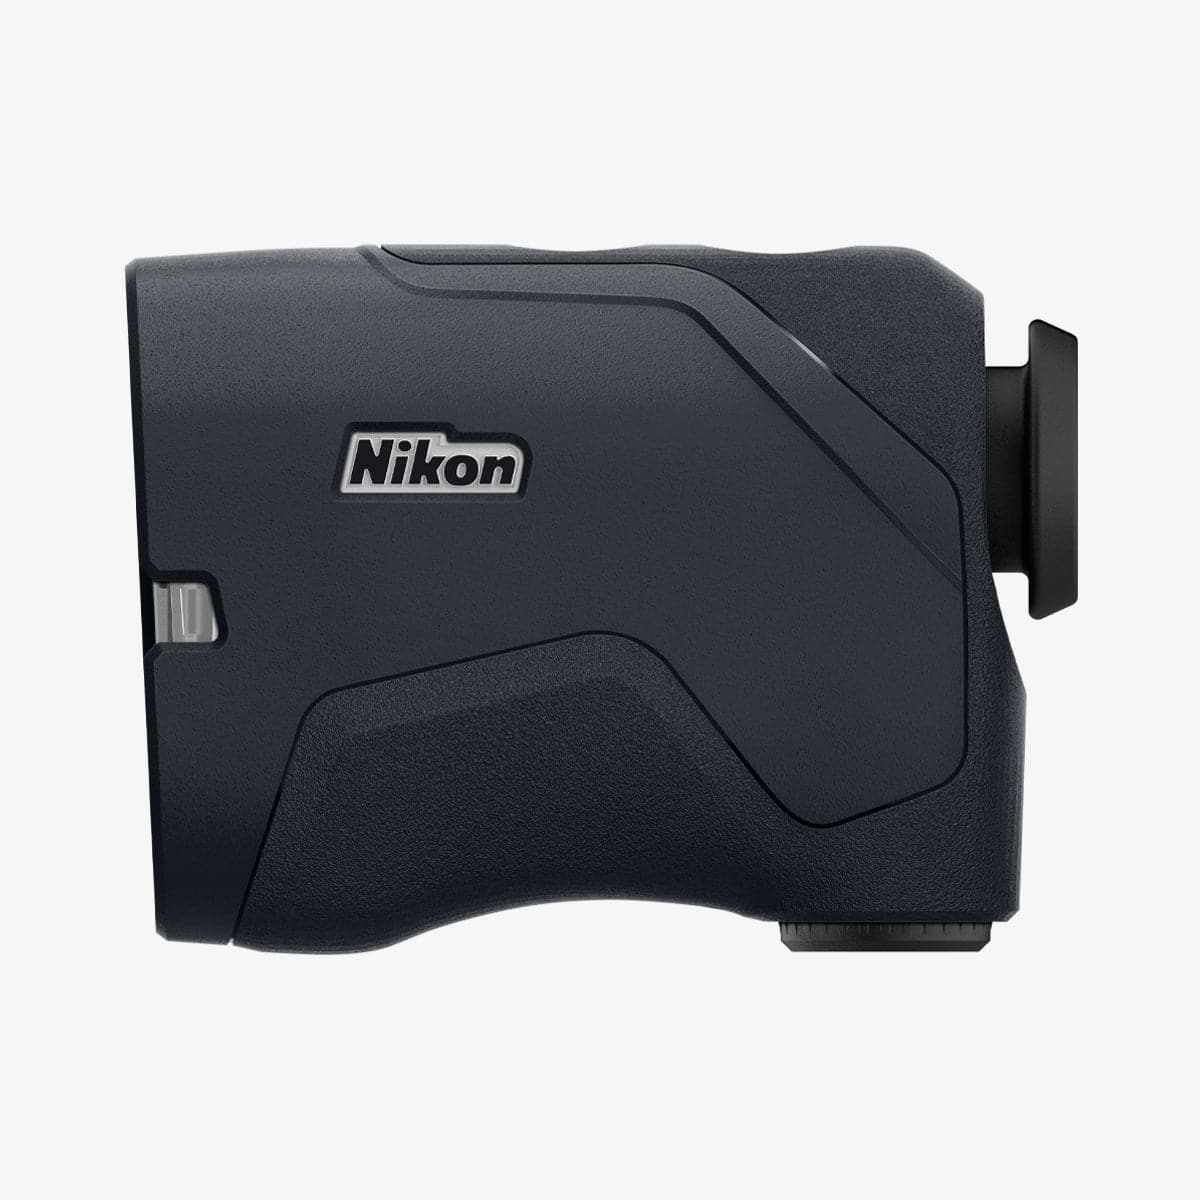 ACS03790 - Nikon Coolshot Pro II Stabilized Rangefinder Case Liquid Air in charcoal showing the side